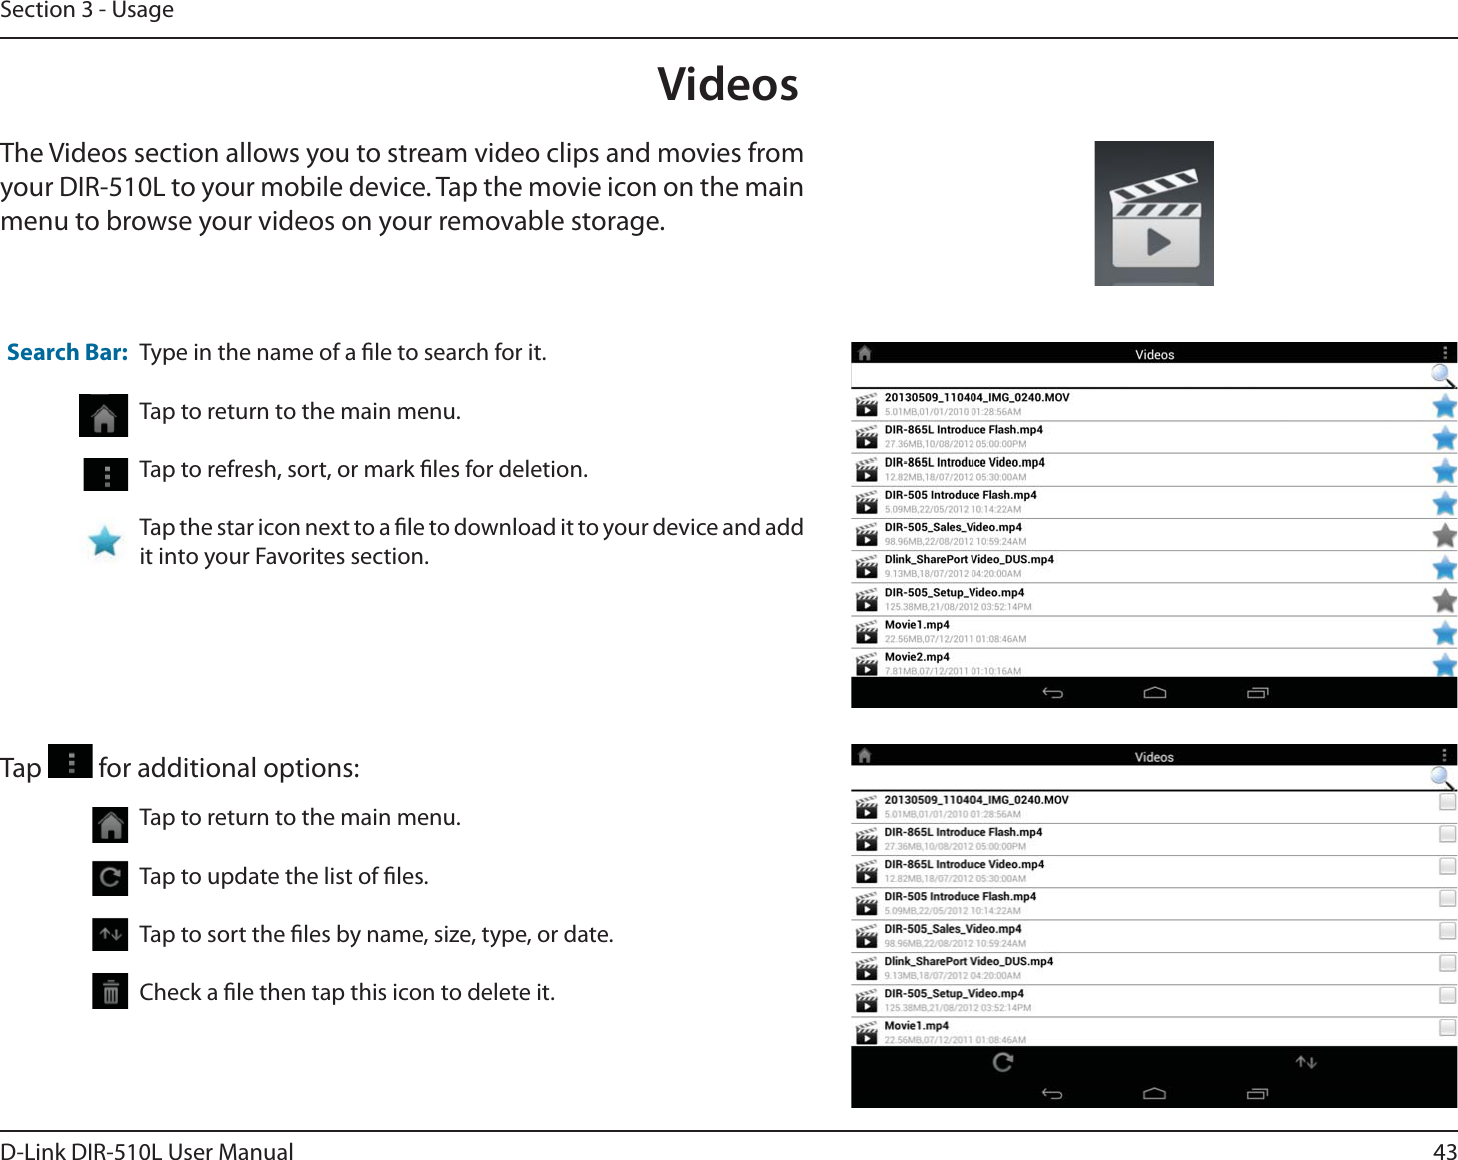 43D-Link DIR-510L User ManualSection 3 - UsageVideosThe Videos section allows you to stream video clips and movies from your DIR-510L to your mobile device. Tap the movie icon on the main menu to browse your videos on your removable storage.Type in the name of a le to search for it.Tap to return to the main menu.Tap to refresh, sort, or mark les for deletion.Tap the star icon next to a le to download it to your device and add it into your Favorites section.Search Bar:Tap to return to the main menu.Tap to update the list of les.Tap to sort the les by name, size, type, or date.Check a le then tap this icon to delete it.Tap   for additional options: